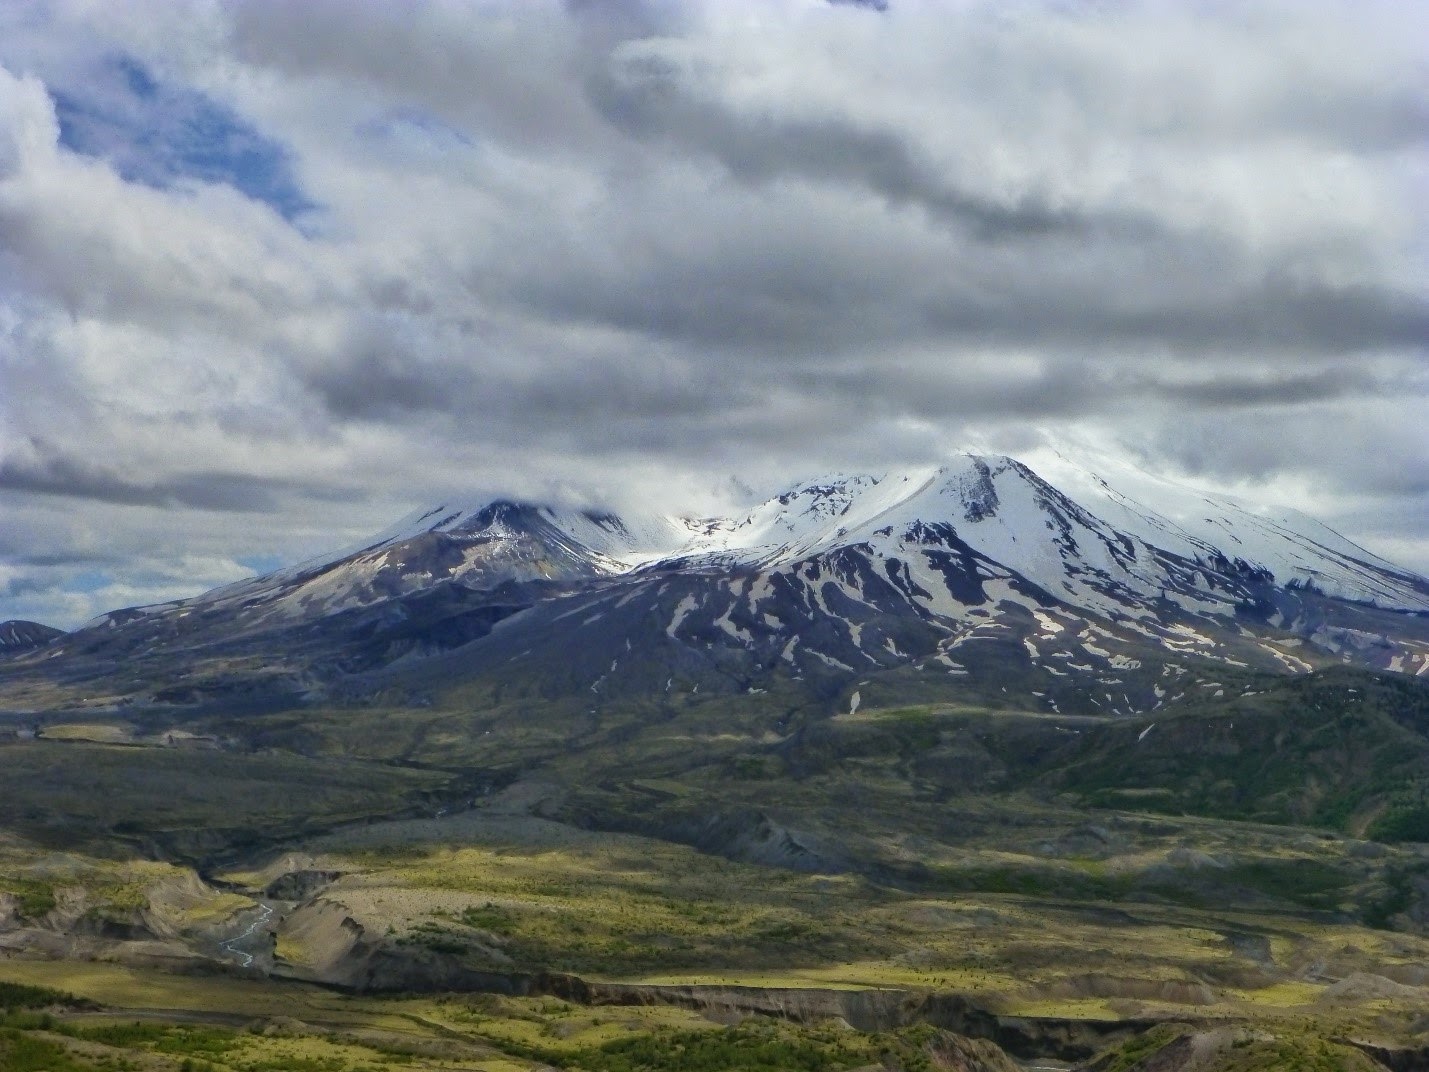 has mount st helens in washington ever had a larger eruption than the one in 1980